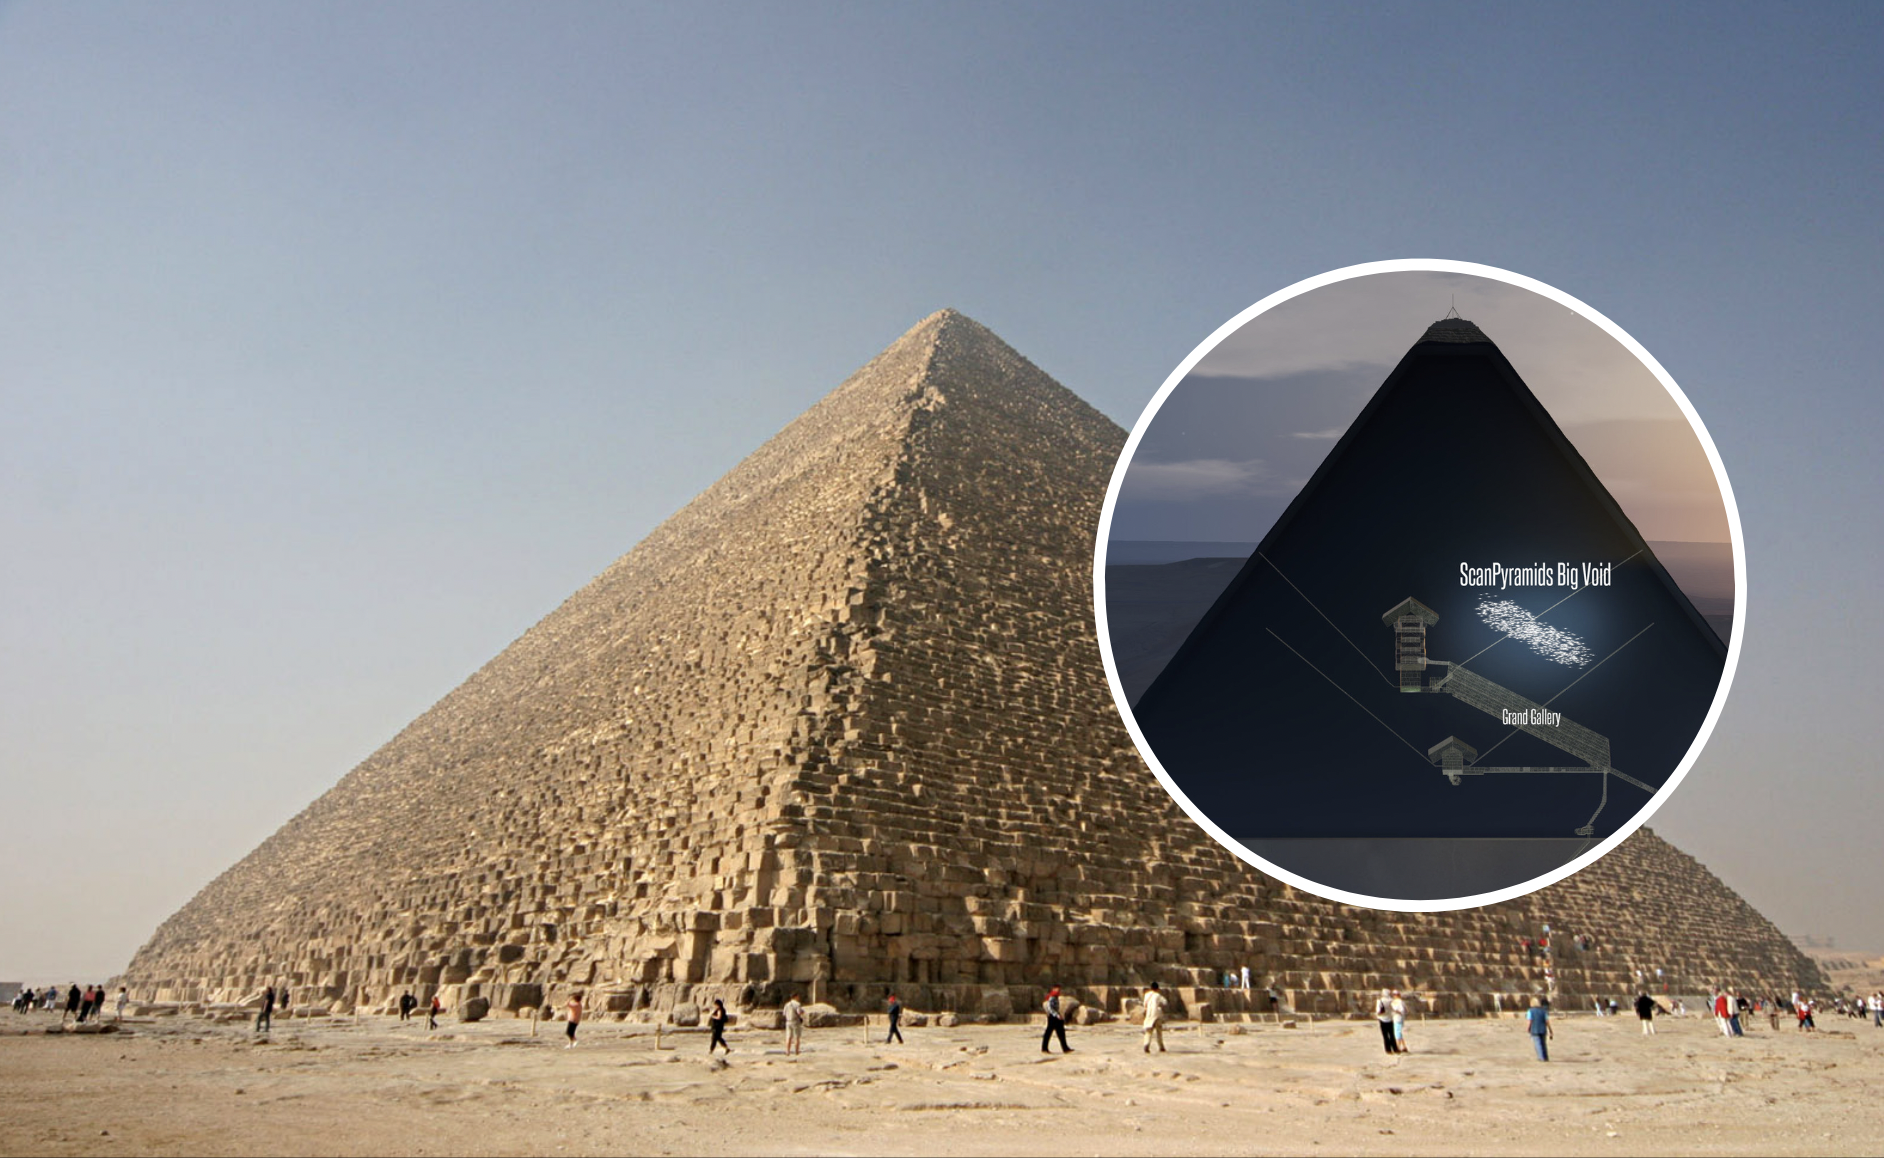 There Is A Massive Void Hidden Inside The Great Pyramid Of Giza, Totally Sealed For Over 4,500 Years